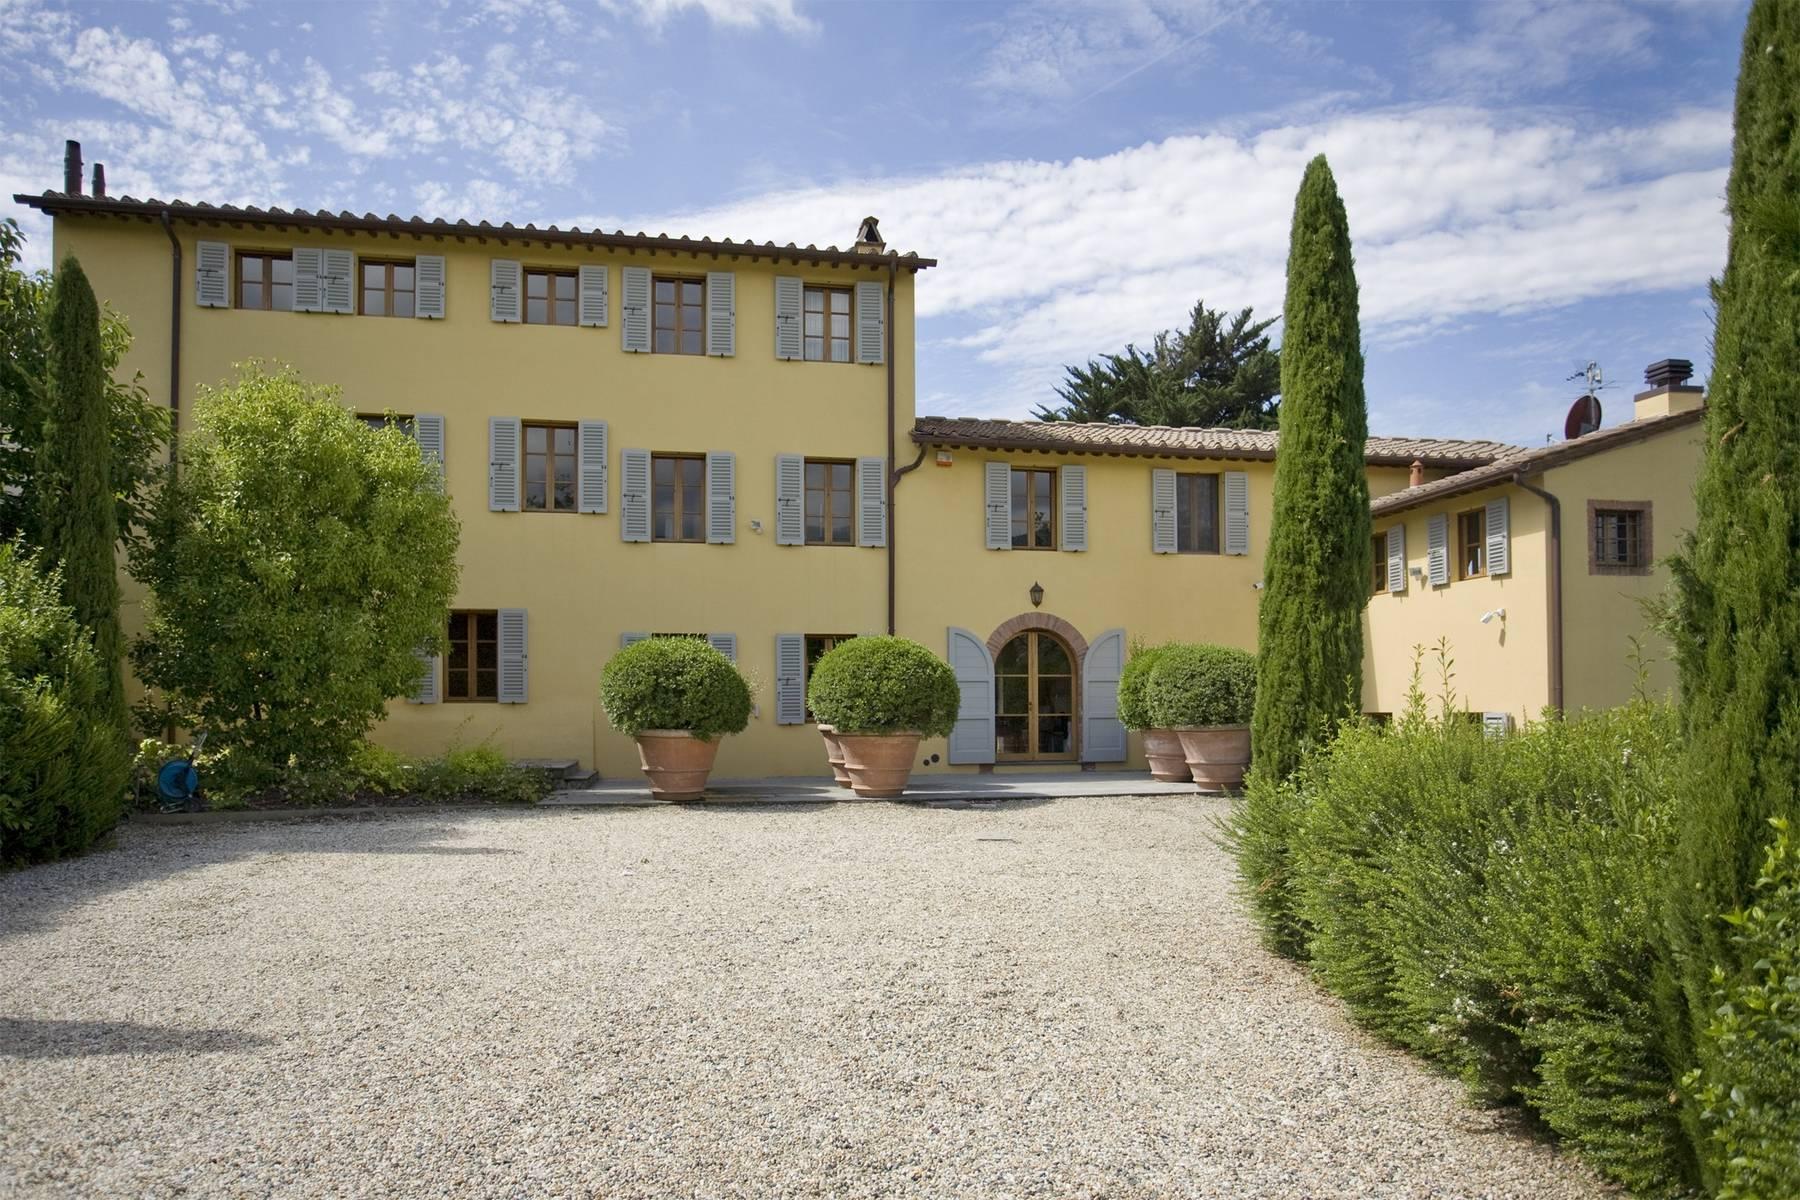 Remarkable luxury villa with olive grove and vineyard in the countryside of Lucca - 23